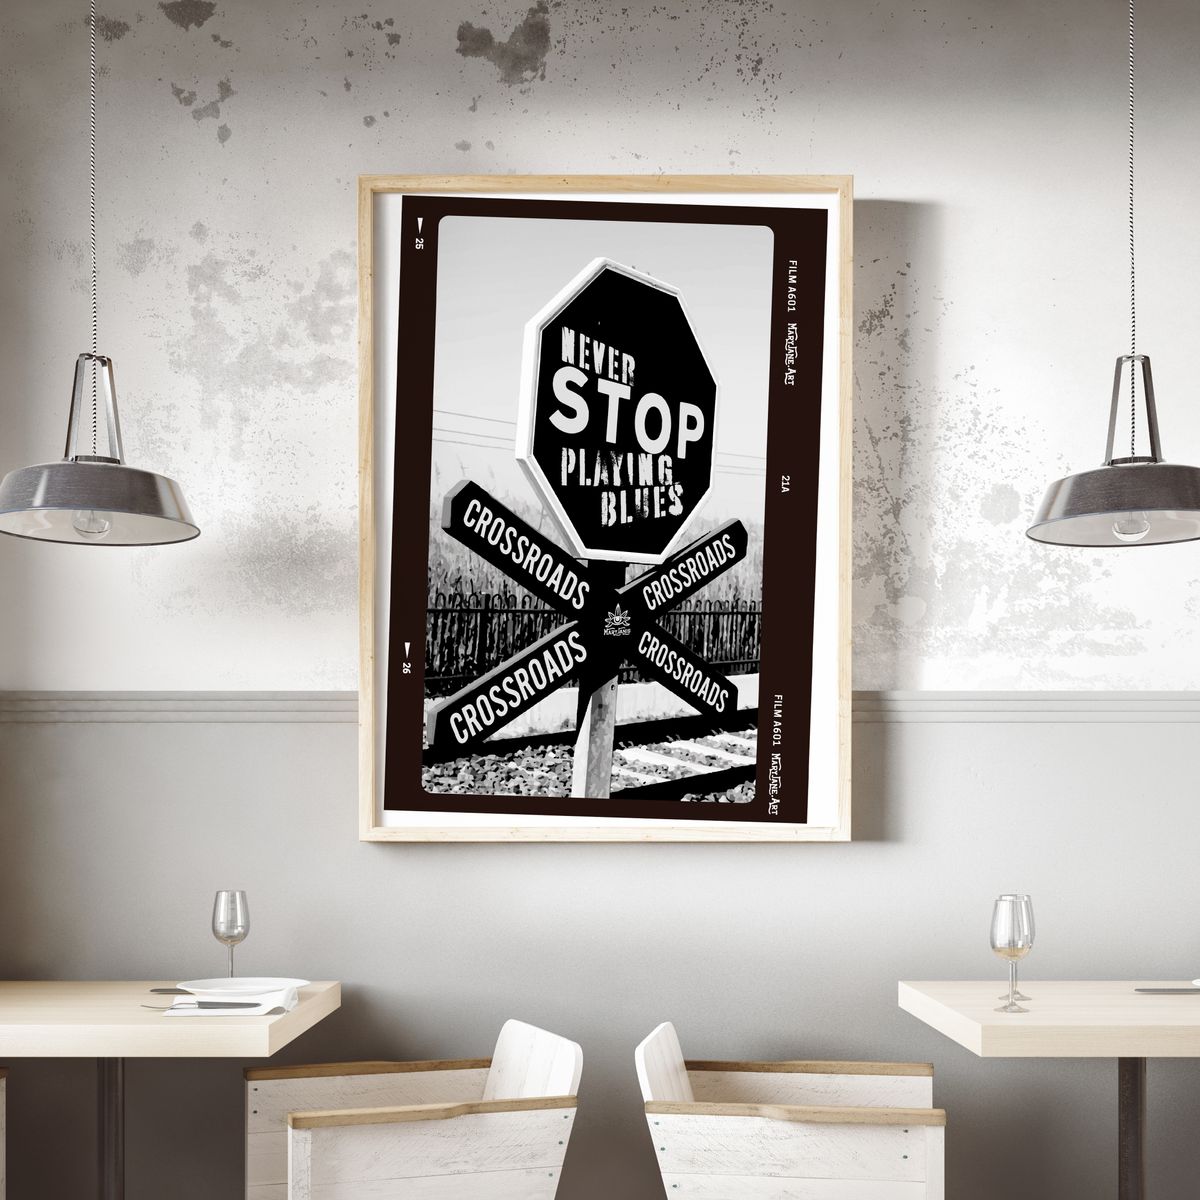 Nome do produto: Never STOP playing blues poster 